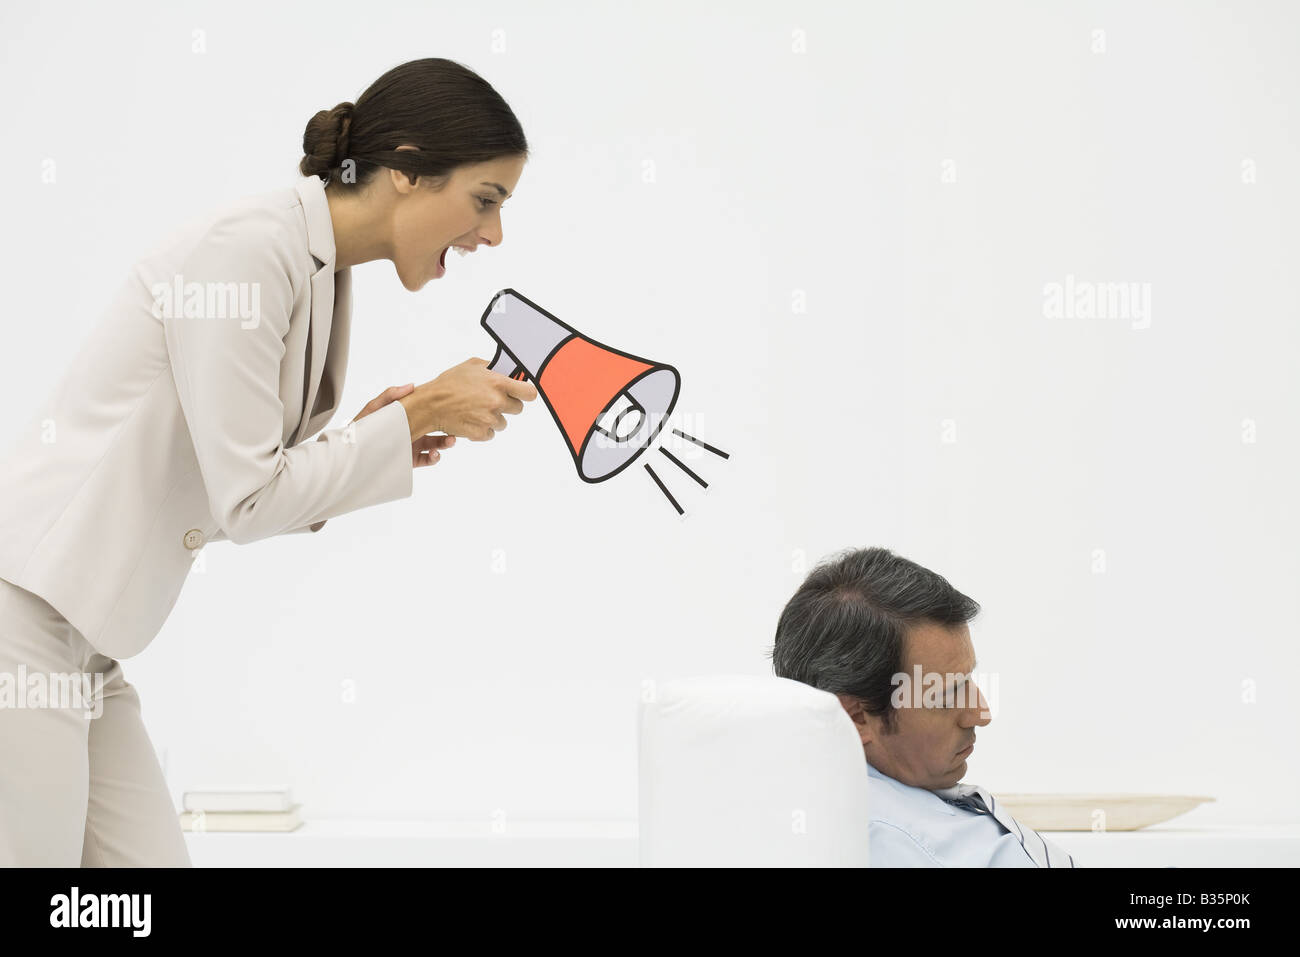 Man sleeping in chair, woman standing behind him, shouting into megaphone Stock Photo